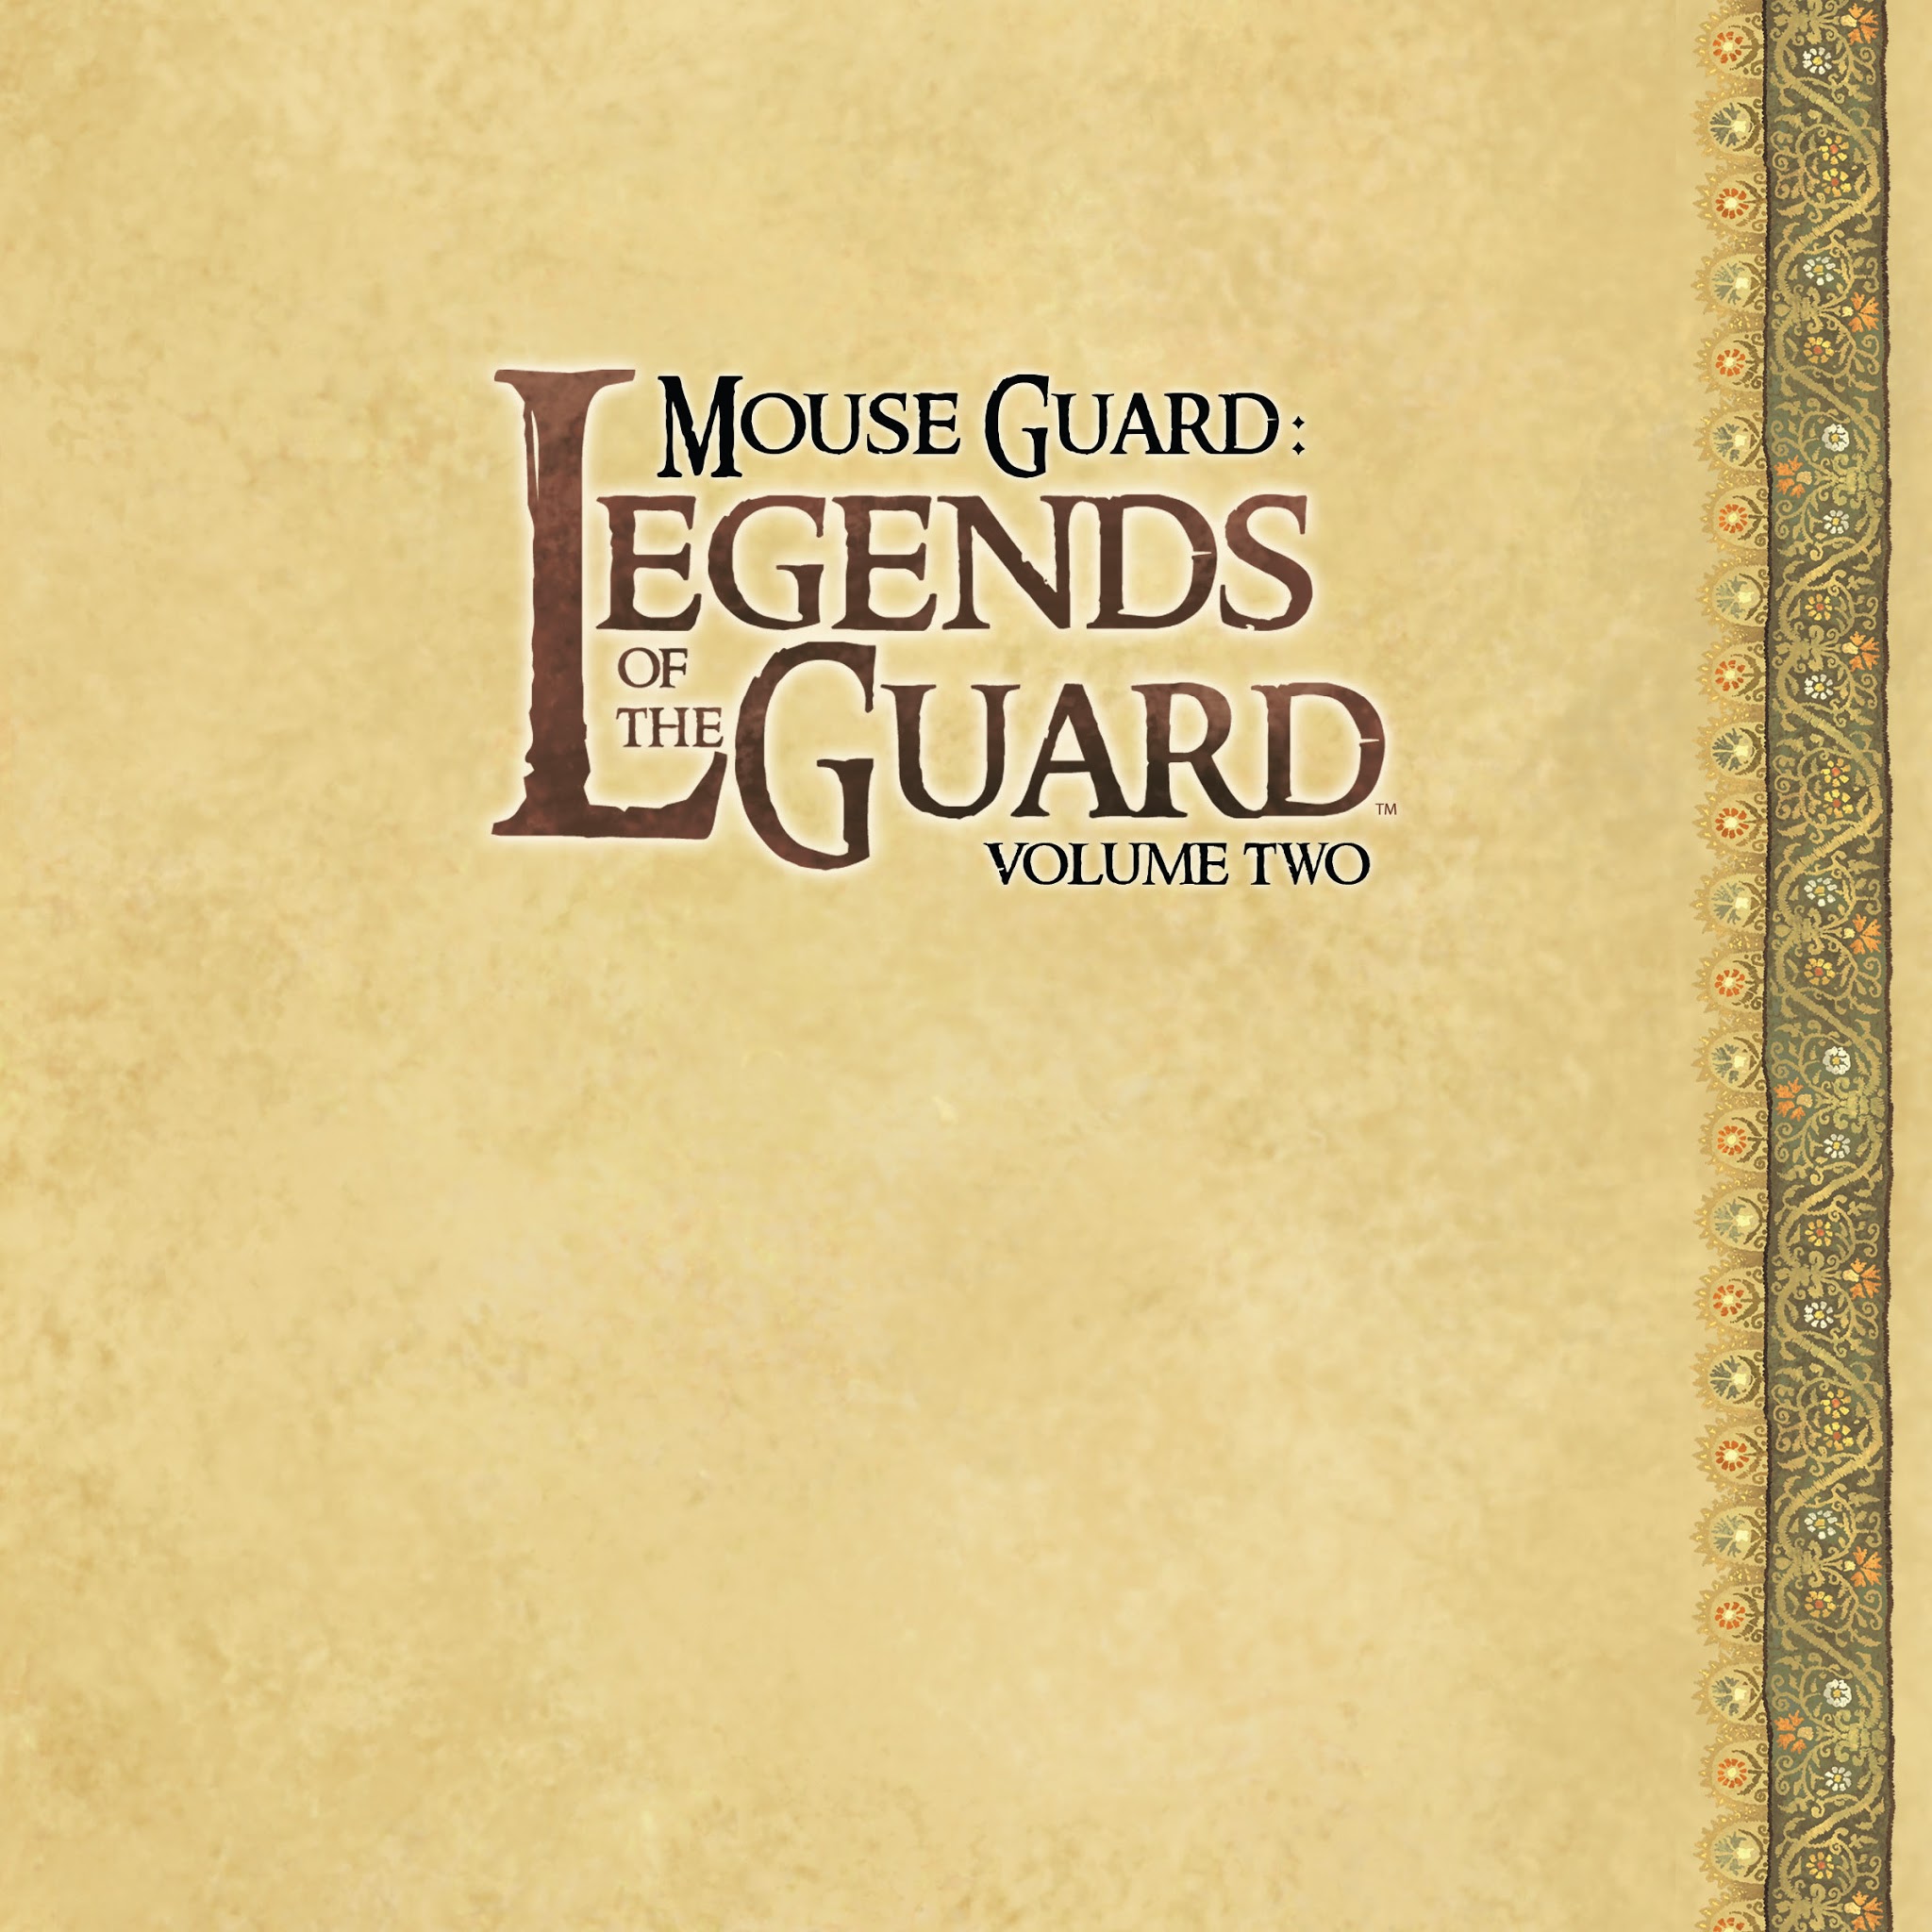 Read online Mouse Guard: Legends of the Guard Volume Two comic -  Issue # TPB - 6